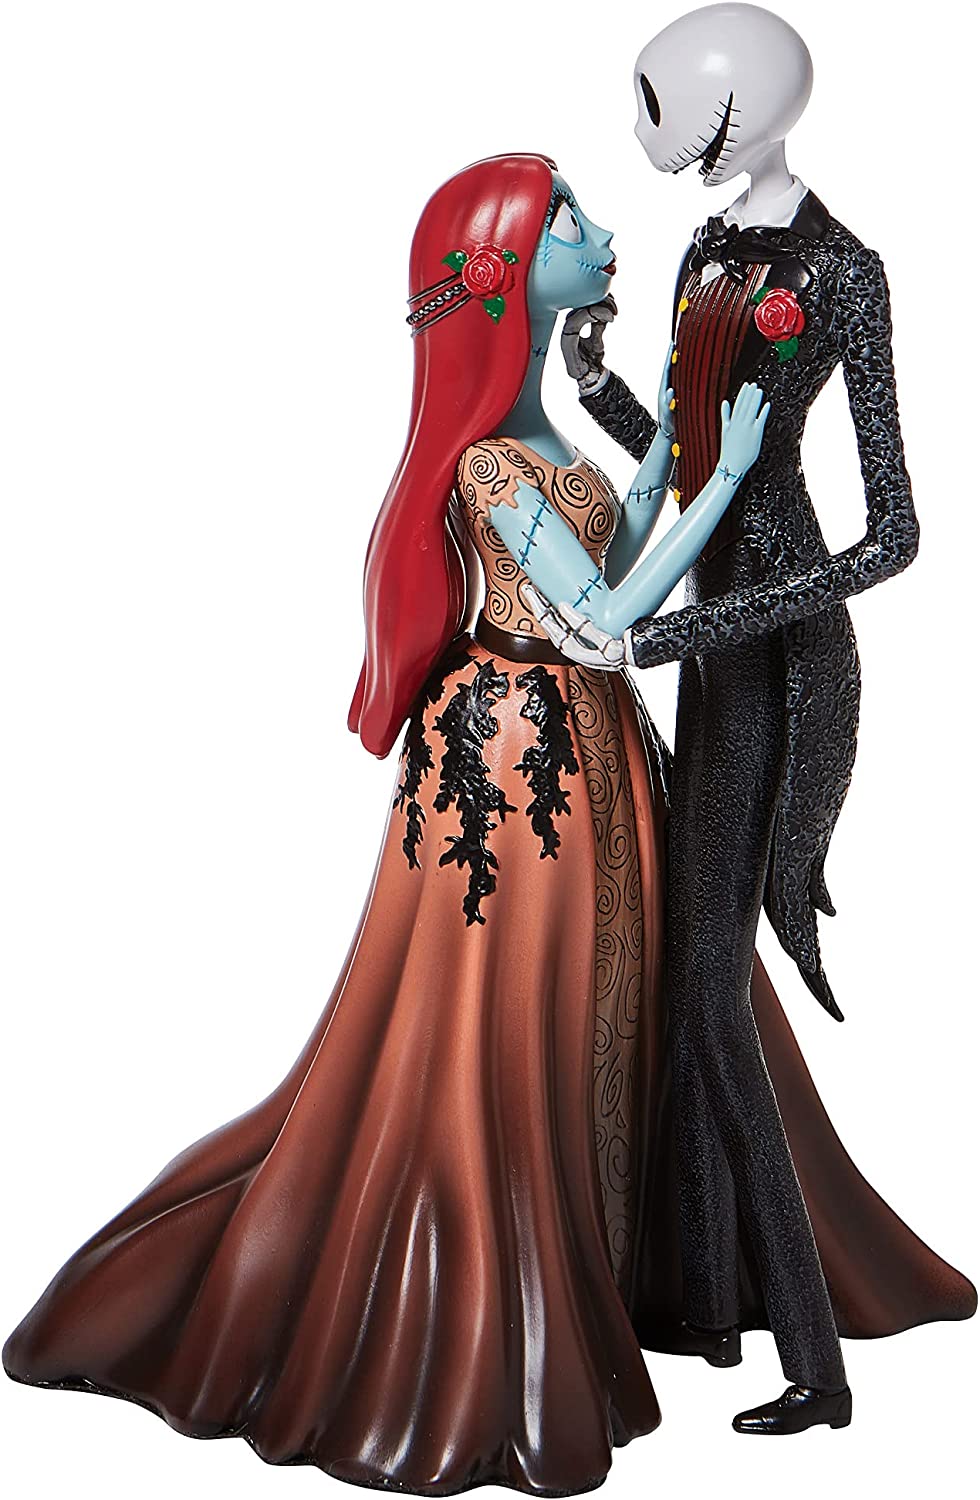 Enesco Disney Showcase Couture de Force The Nightmare Before Christmas Jack and Sally Embracing Figurine, 9.5 Inch | CCGPrime